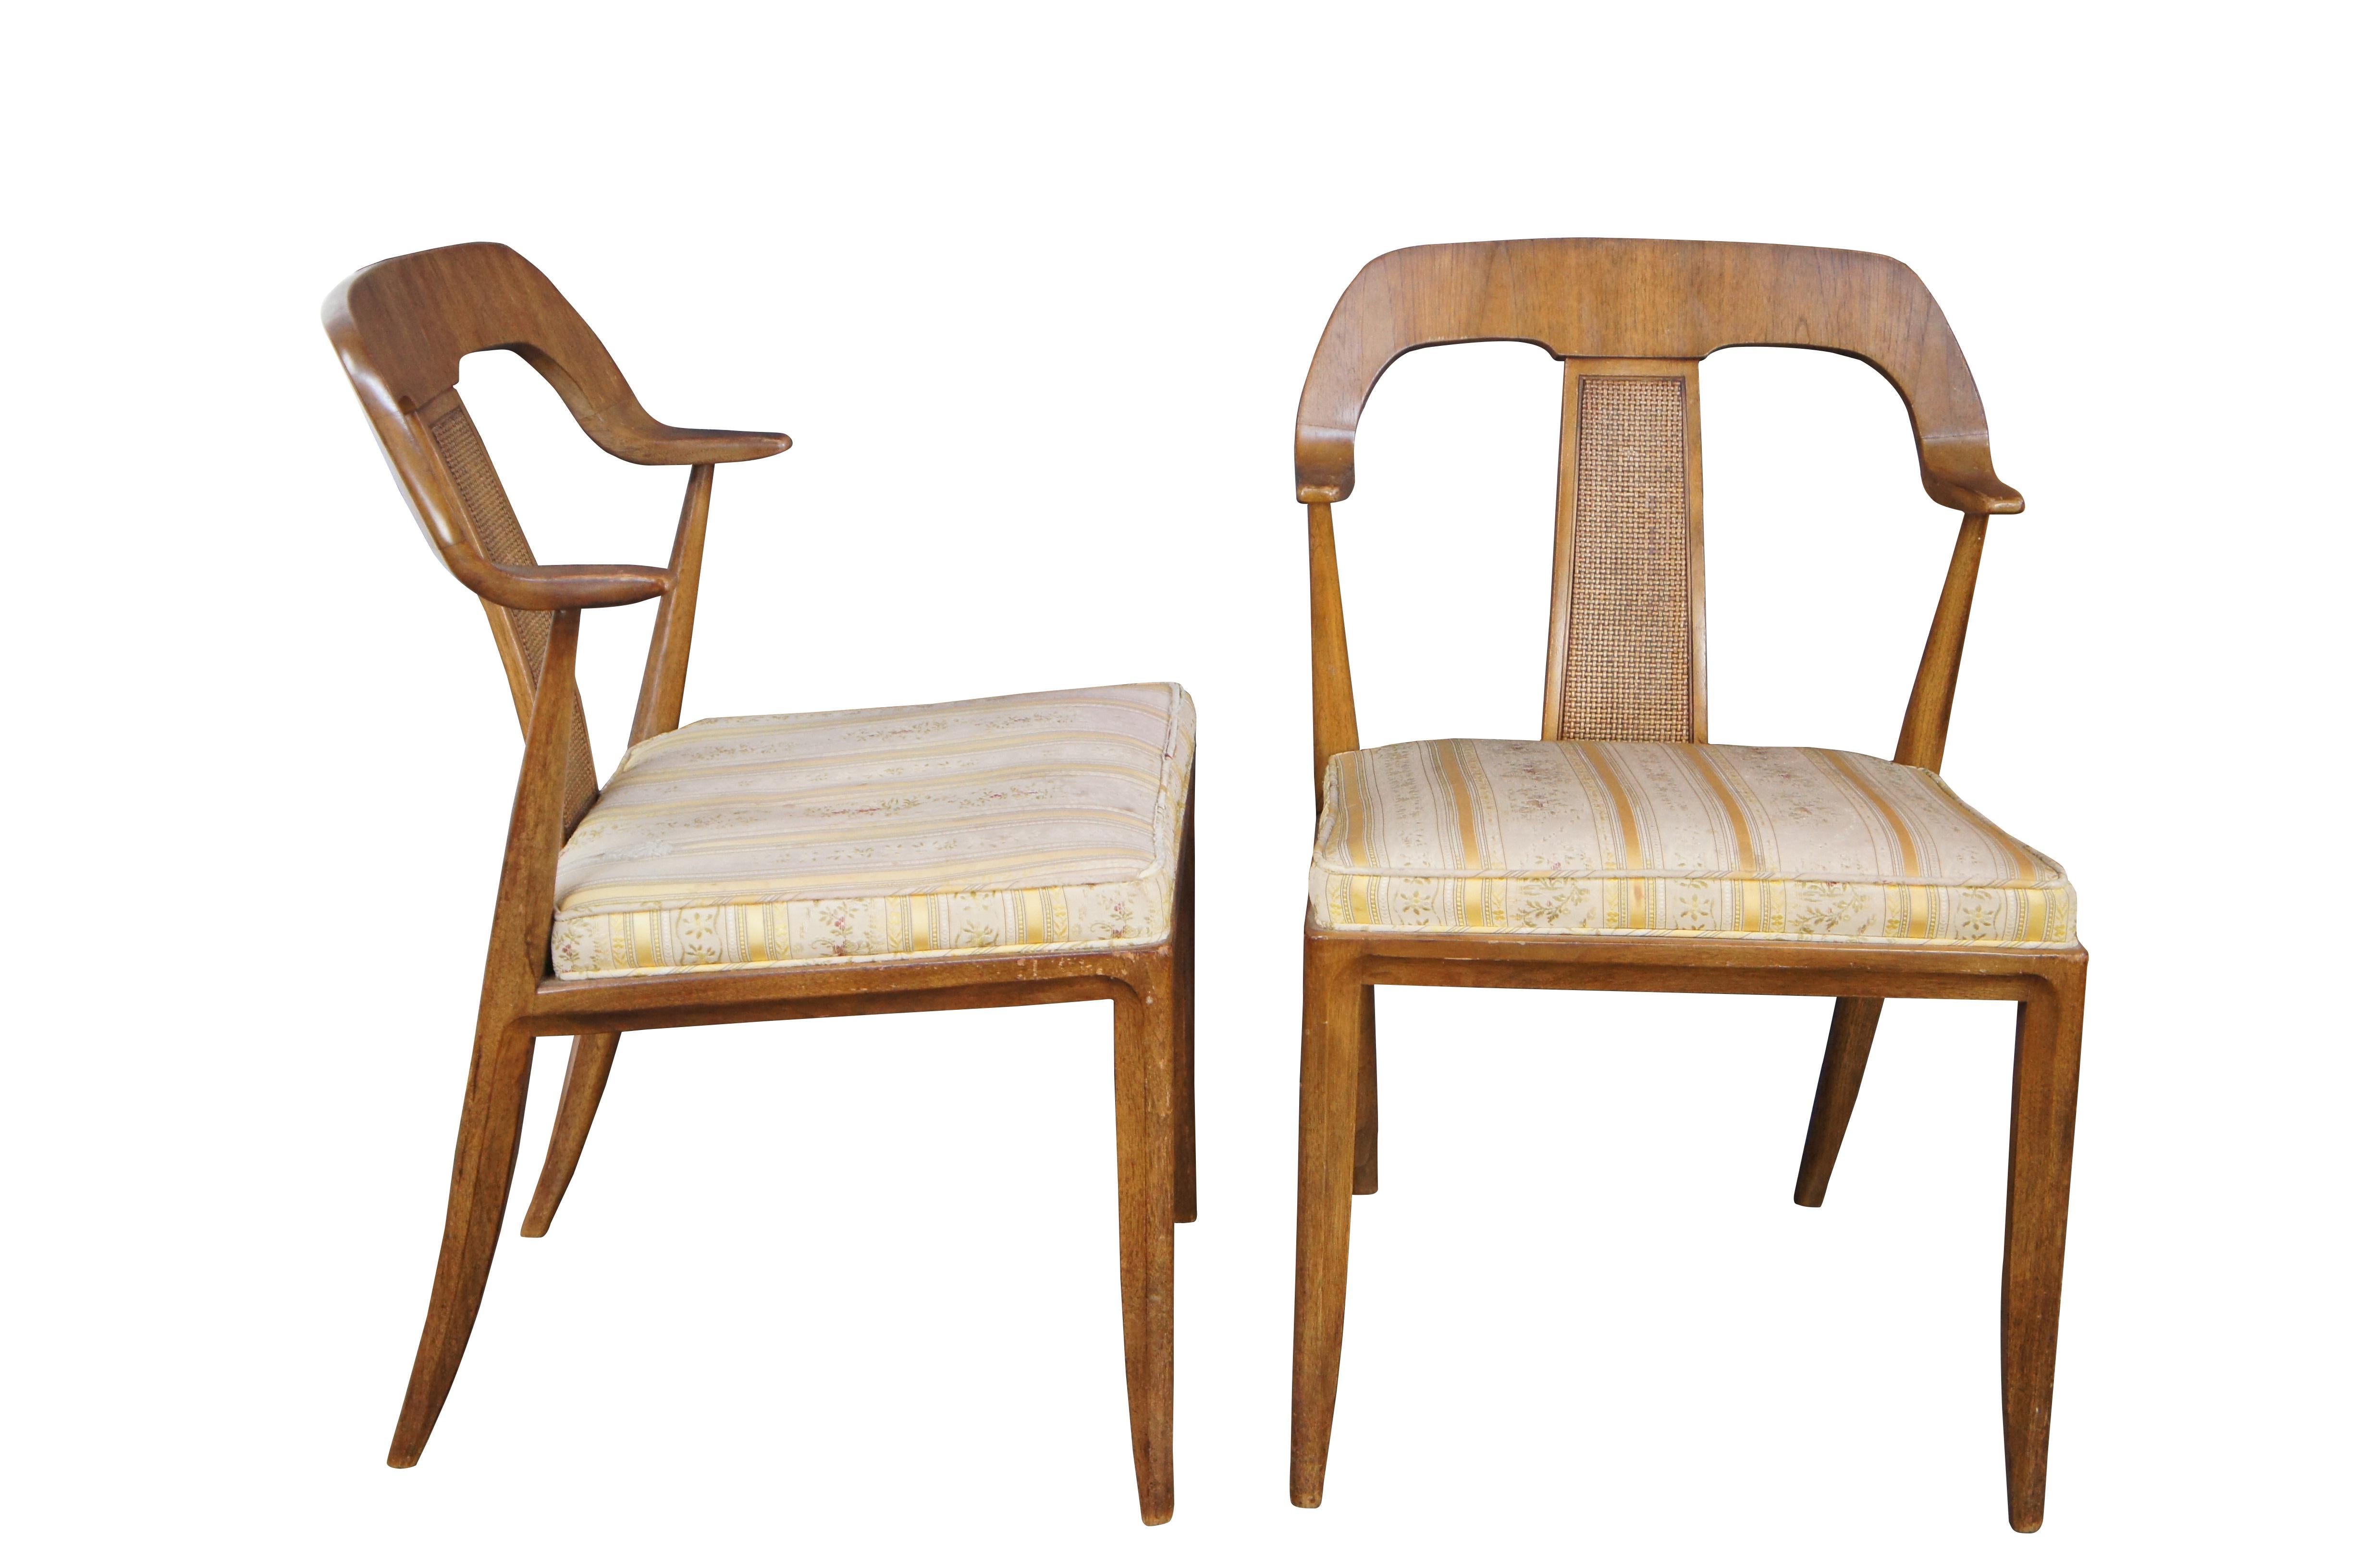 4 Michael Taylor for Tomlinson Sophisticate Walnut Dining Chairs. American Mid Century. Sculptural curved crests with woven wicker splats. Neoclassical style fabric.

Dimensions:
20